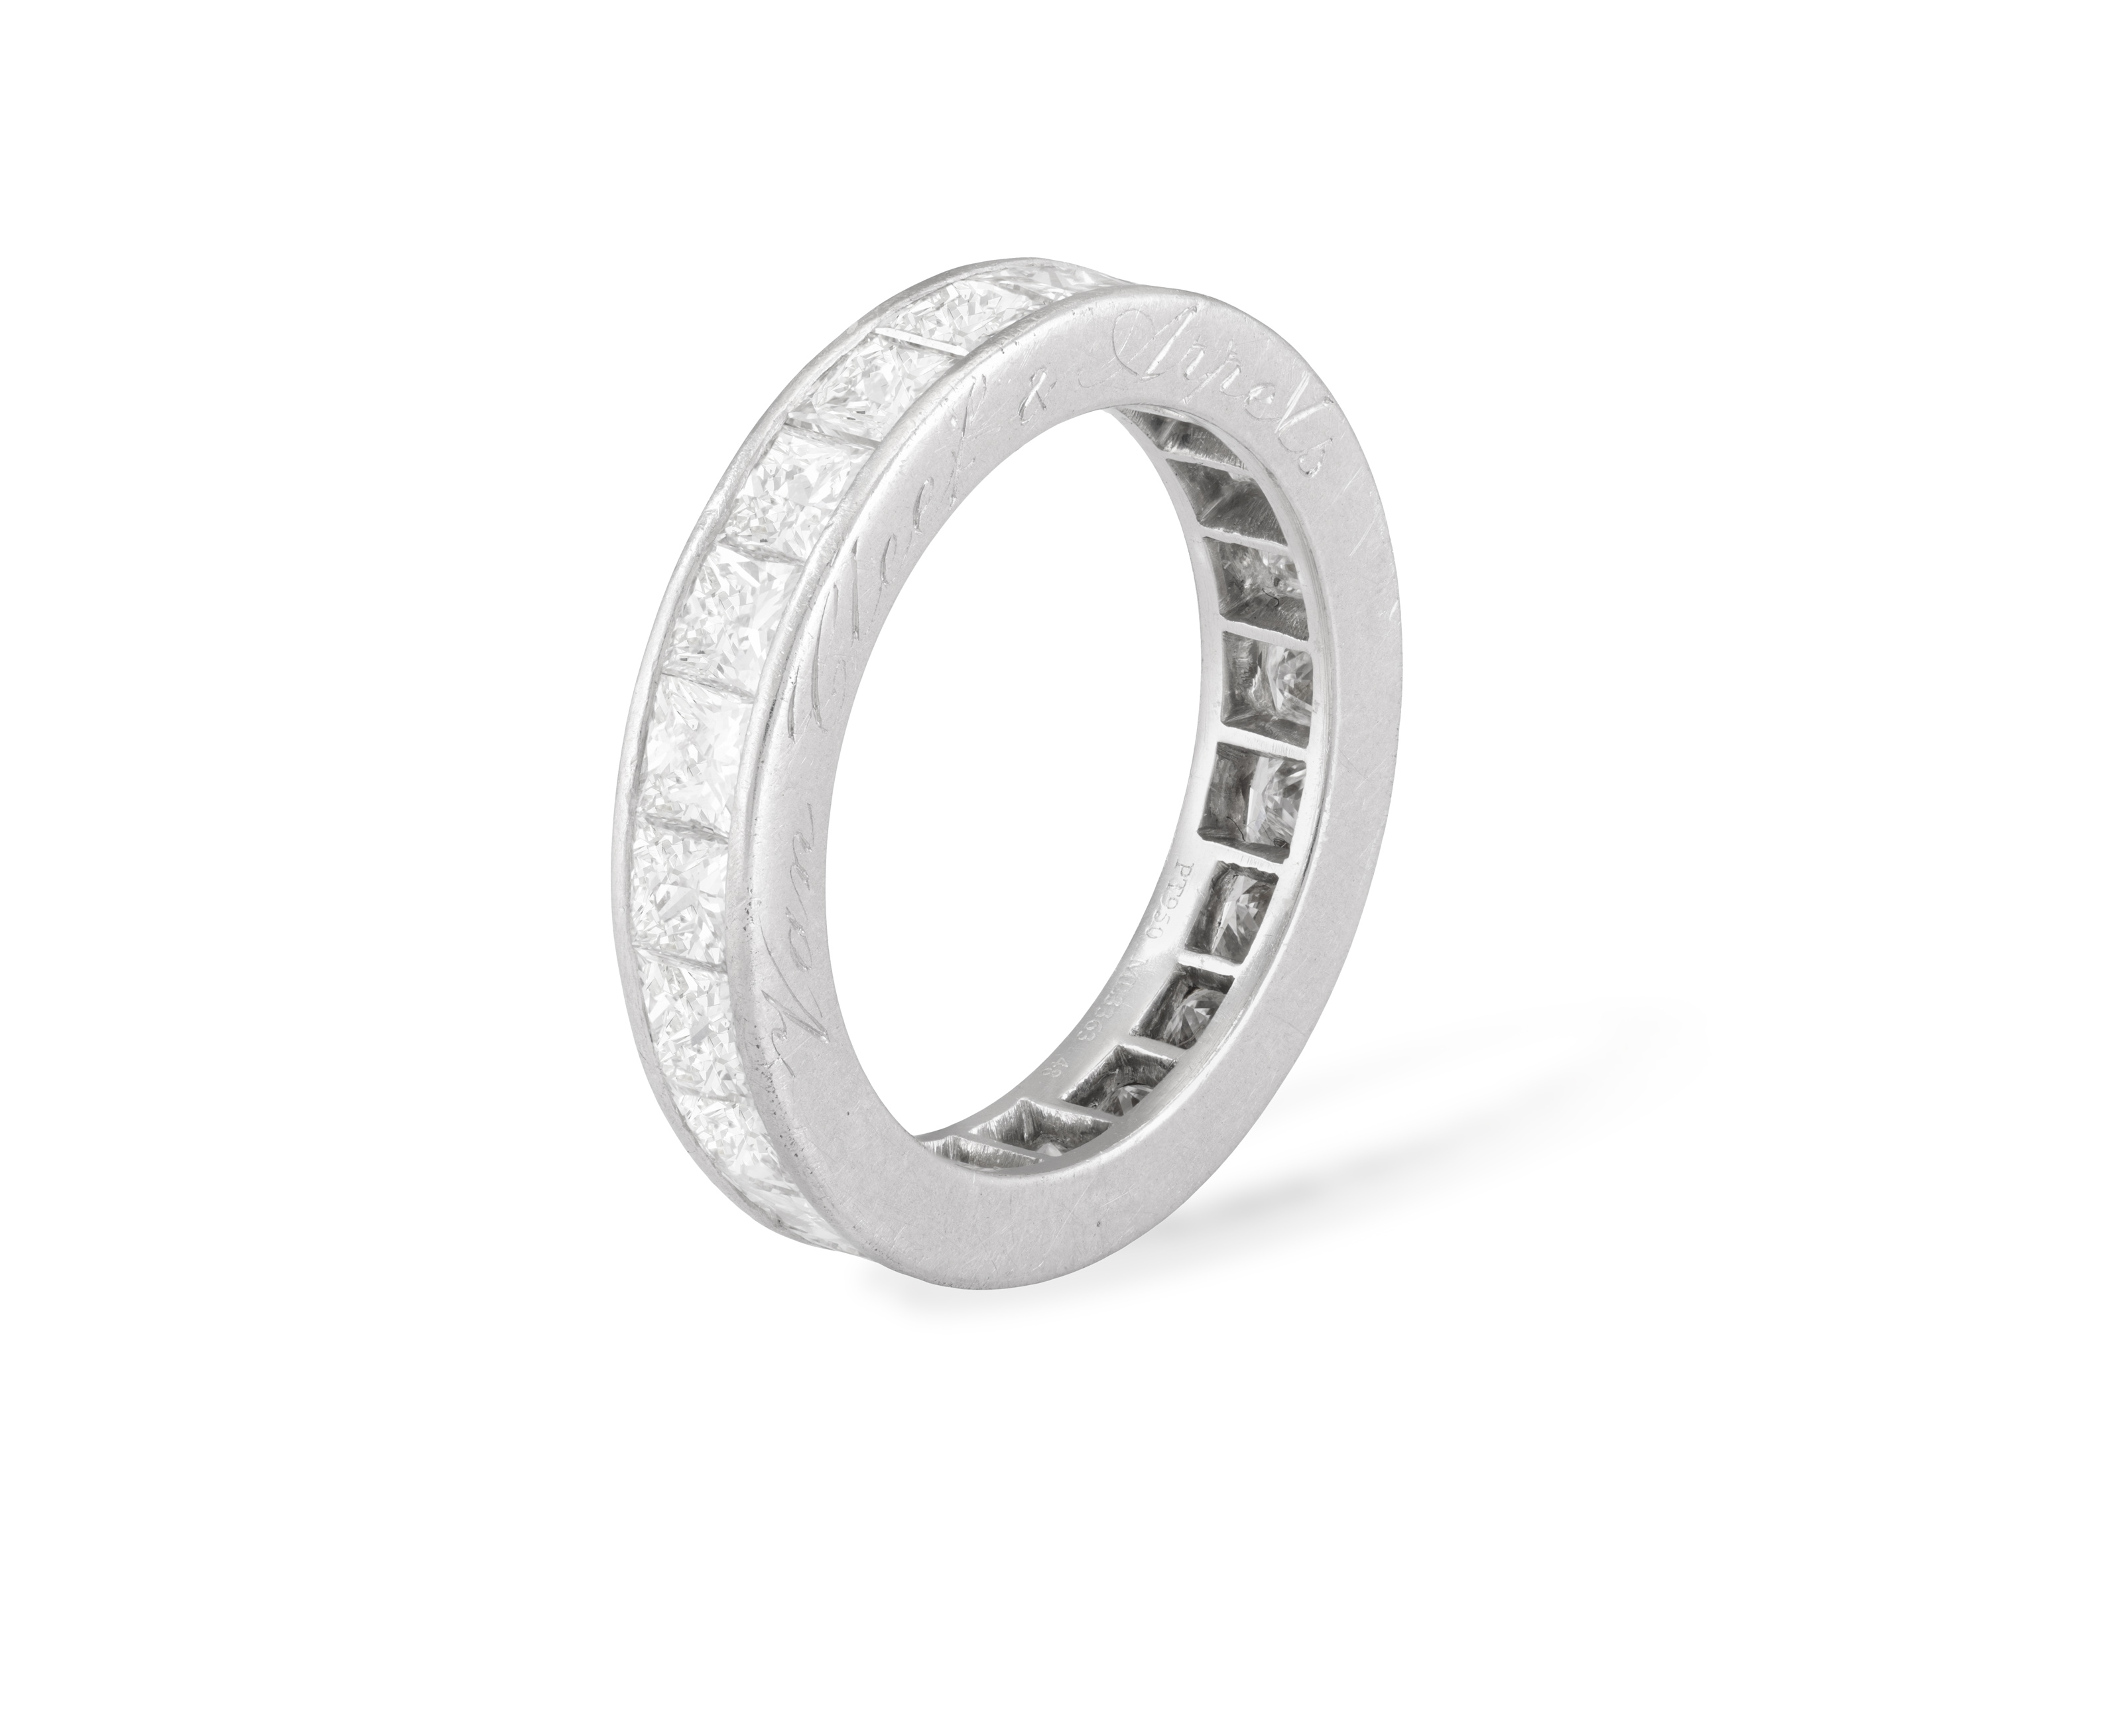 A DIAMOND ETERNITY RING, BY VAN CLEEF AND ARPELS Composed of a continuous row of princess-cut